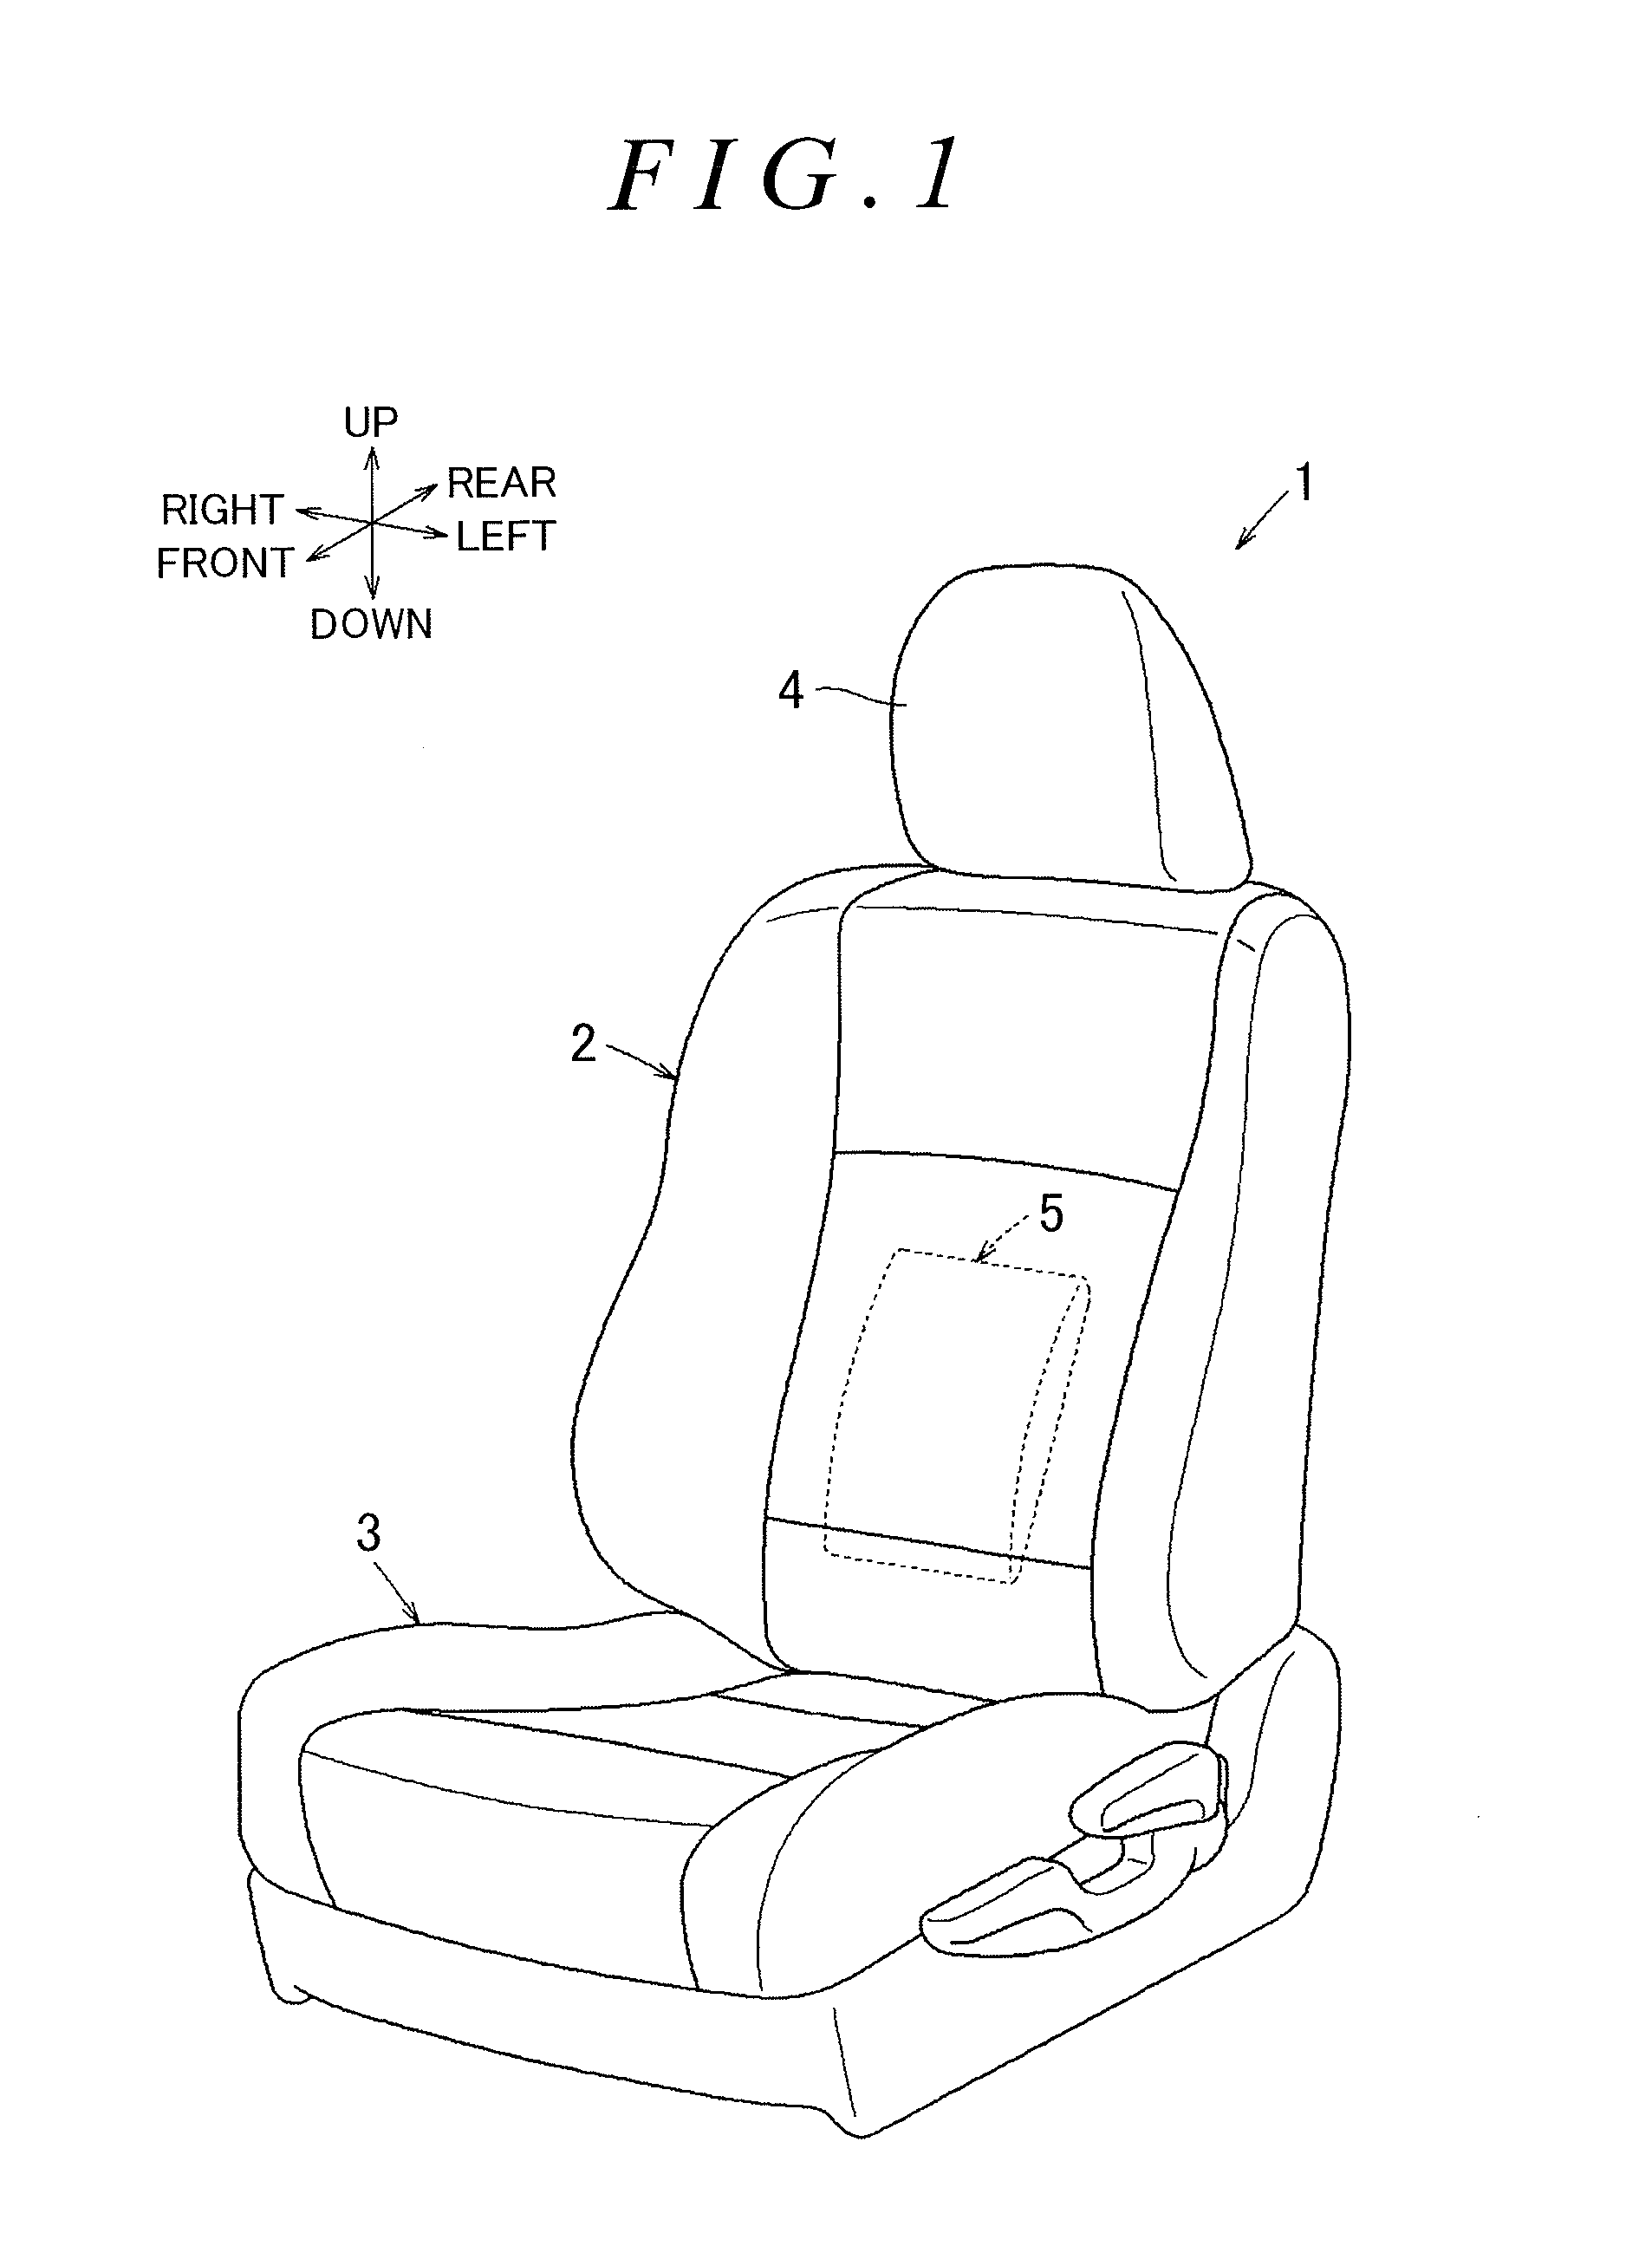 Support device for vehicle seat